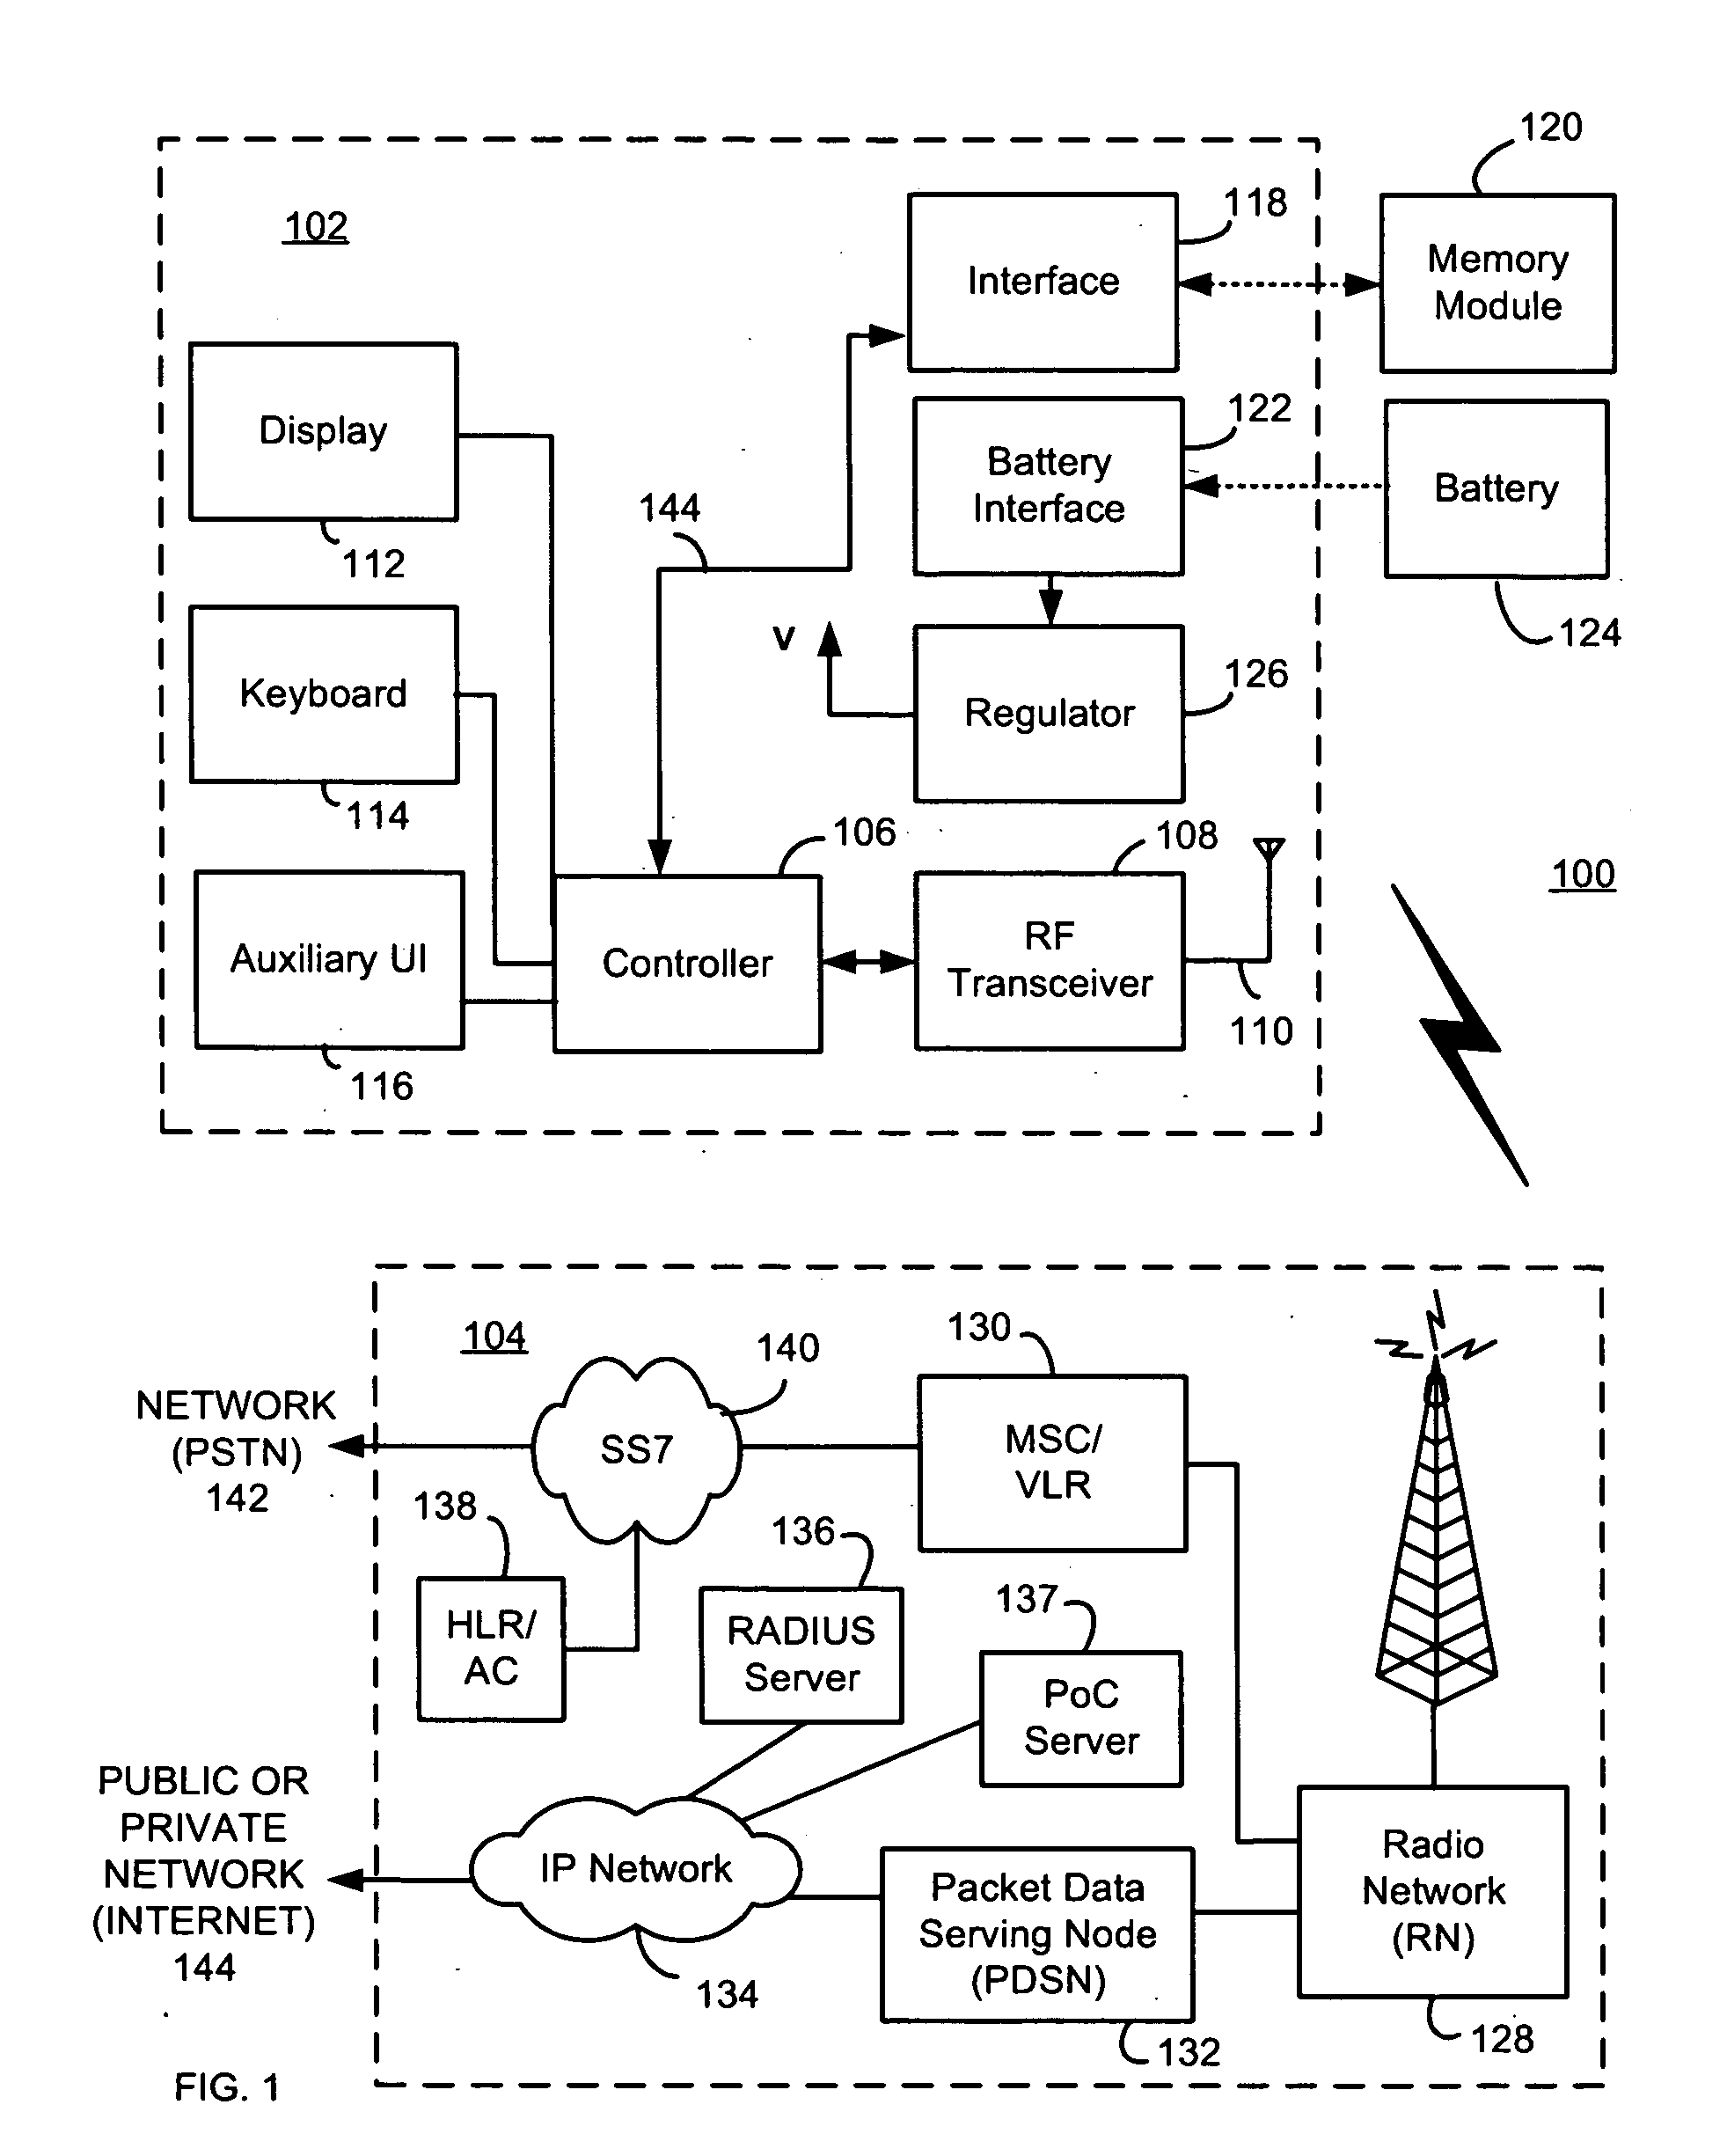 Method and apparatus for creating a communication group using an address book